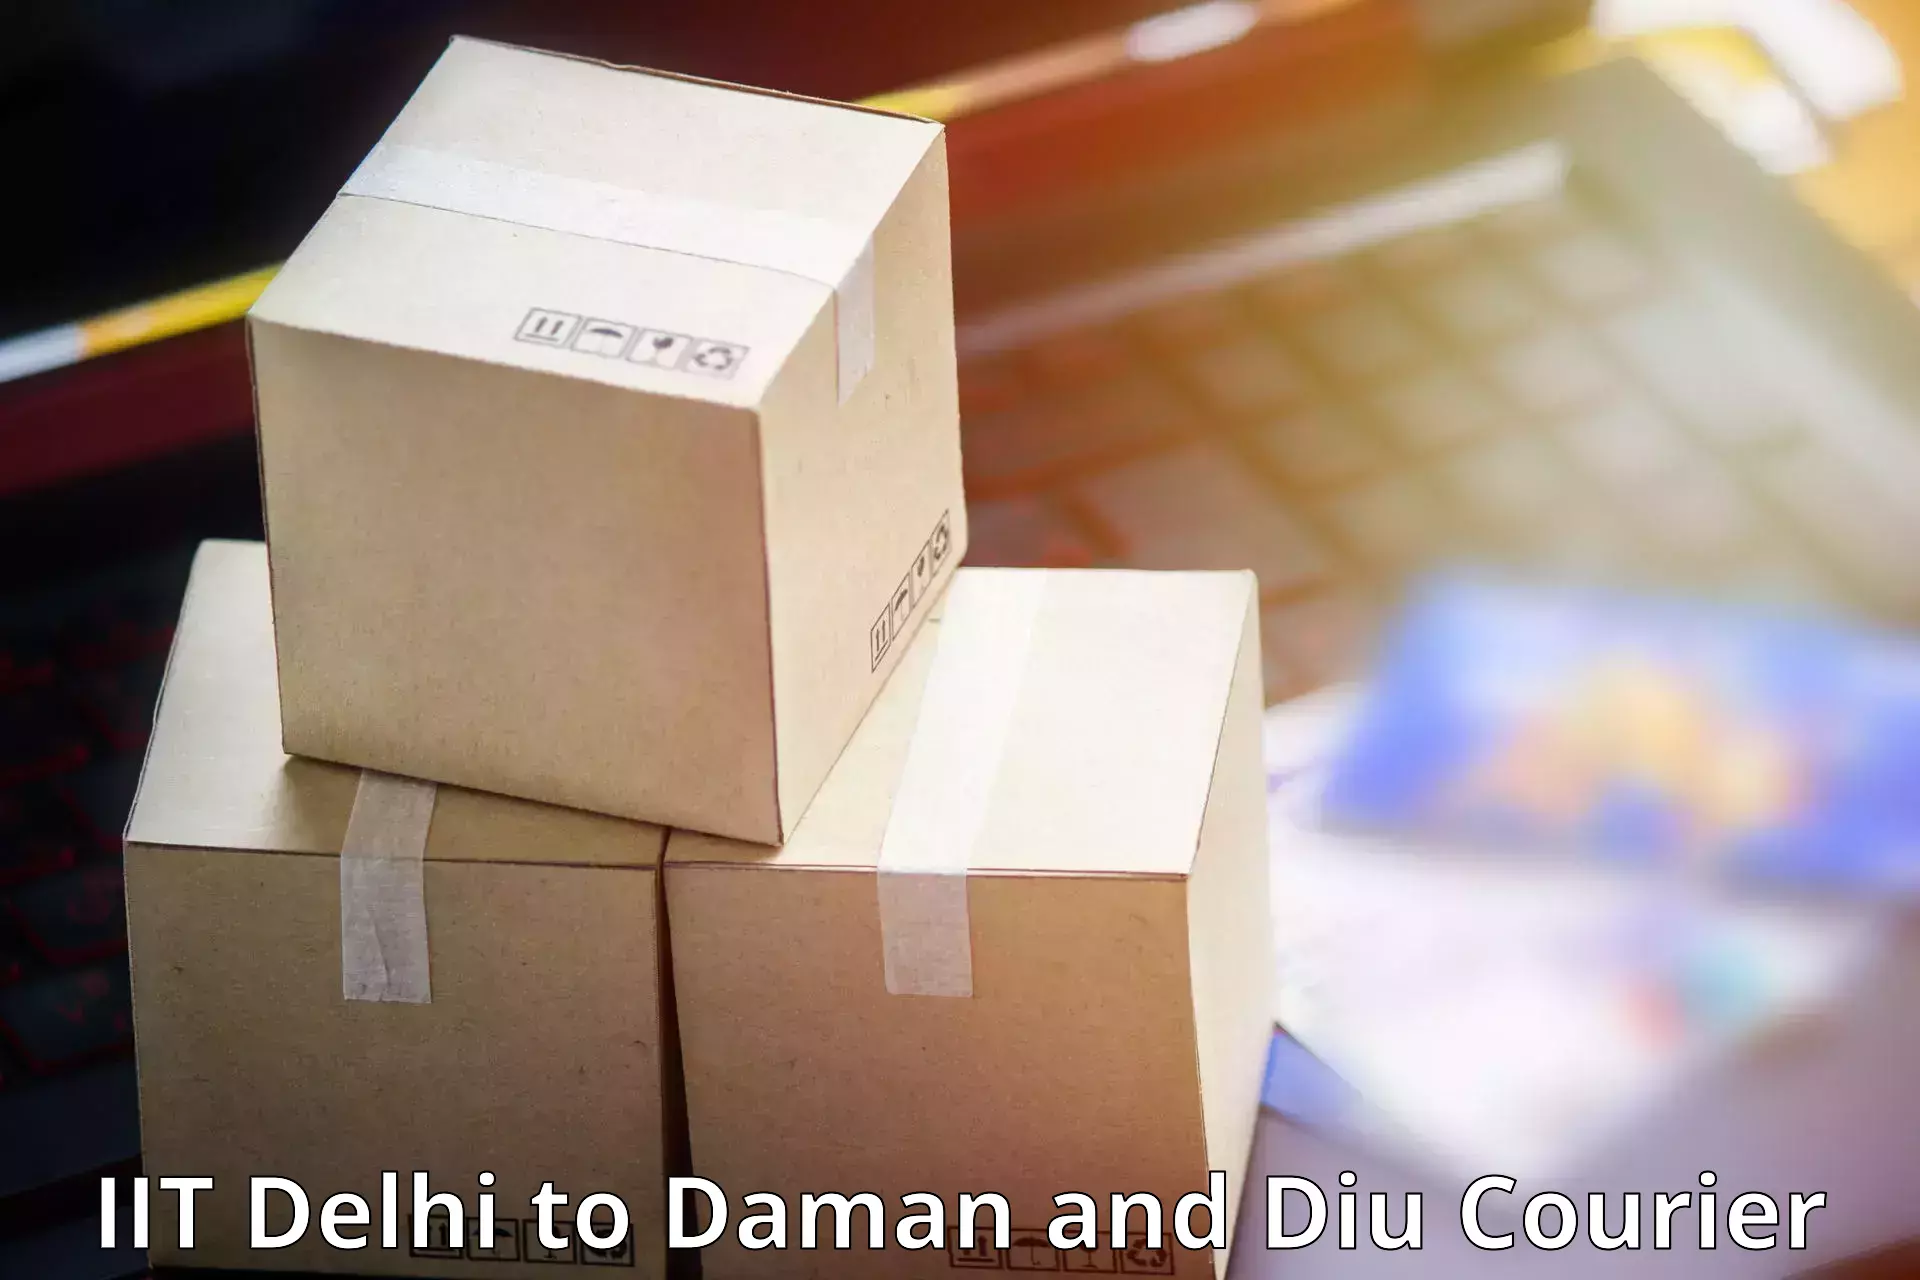 Subscription-based courier IIT Delhi to Diu